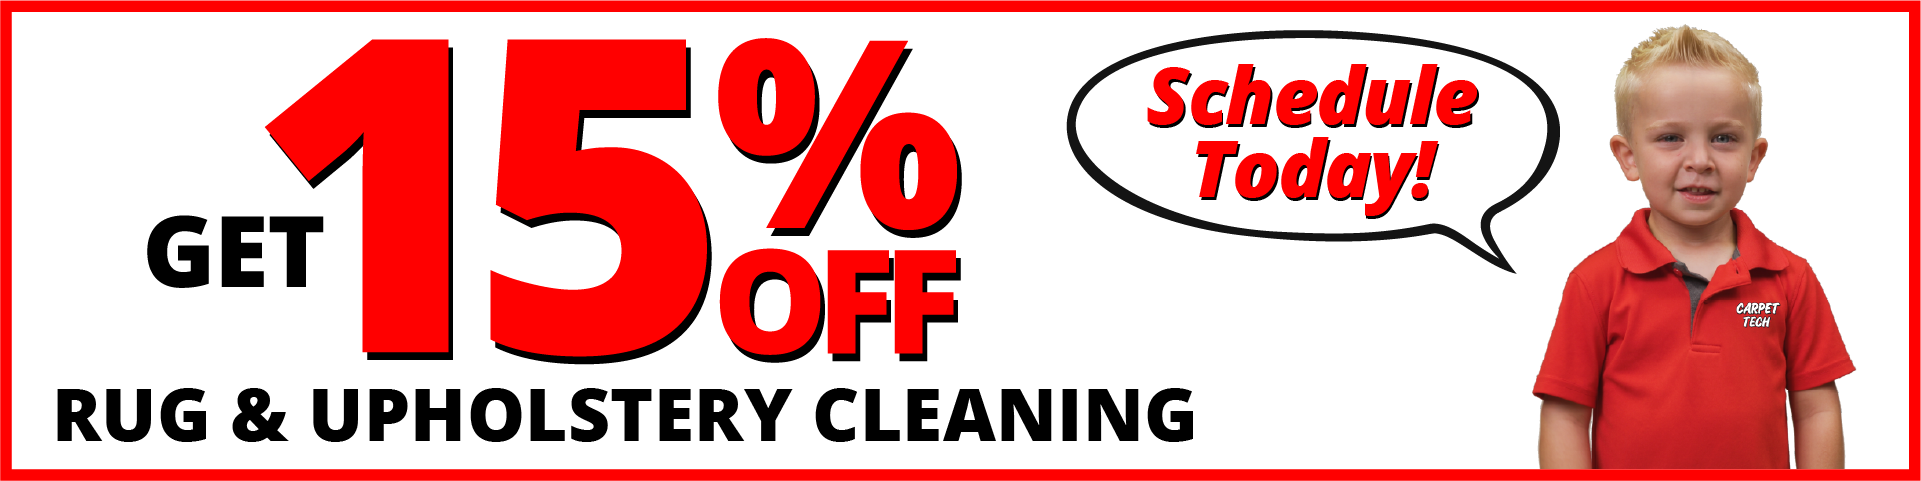 Get 15% OFF Rug & Upholstery Cleaning